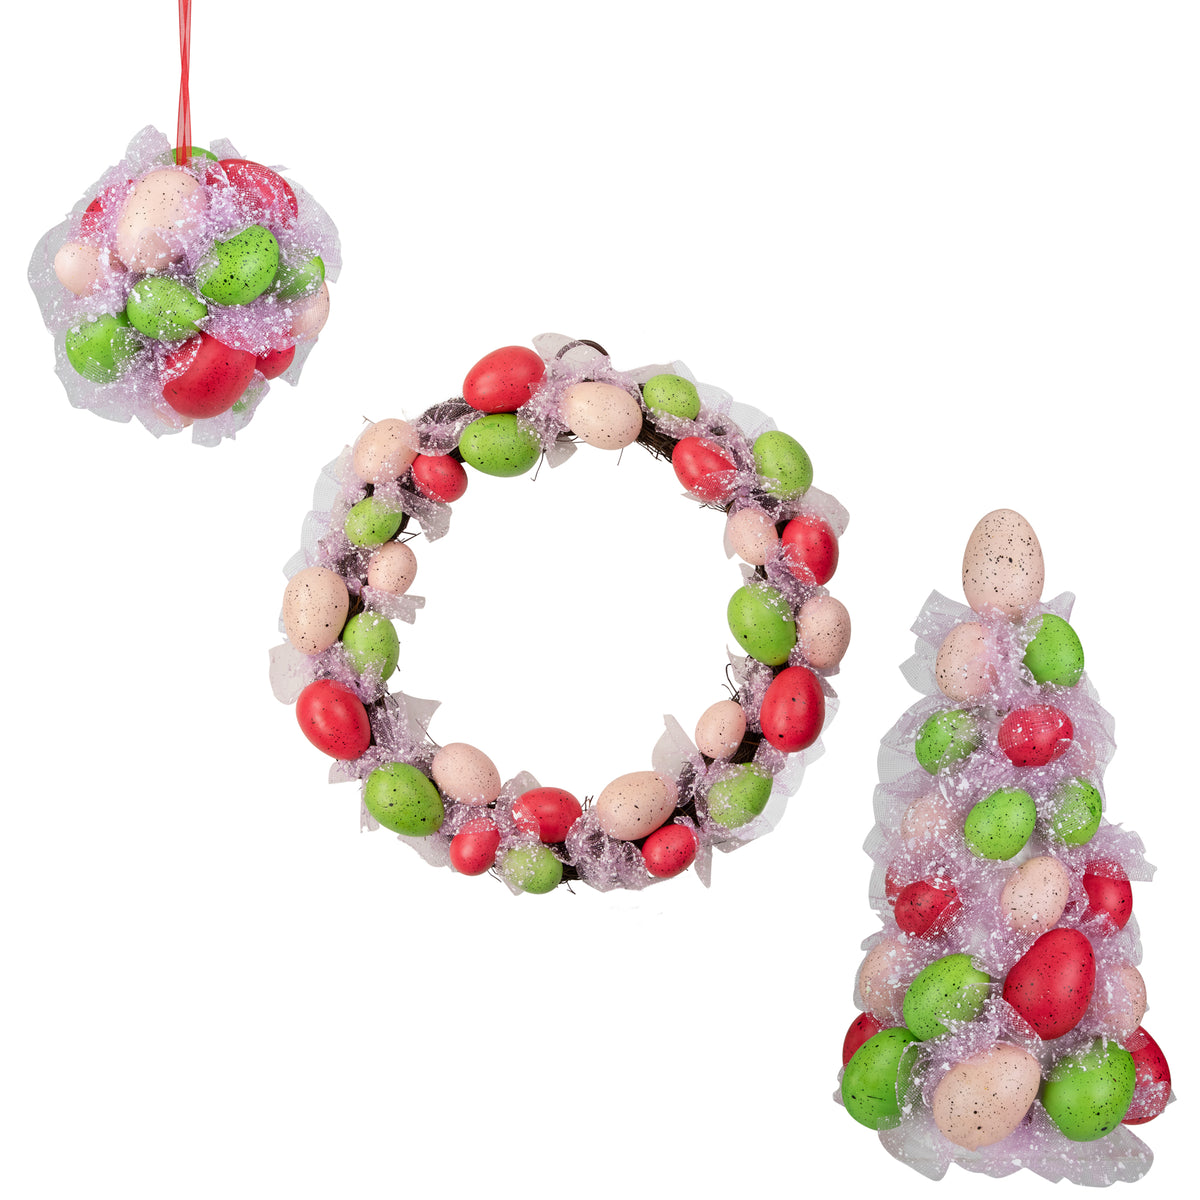 Speckled Easter Egg Tree Ball & Wreath 3 Piece Set